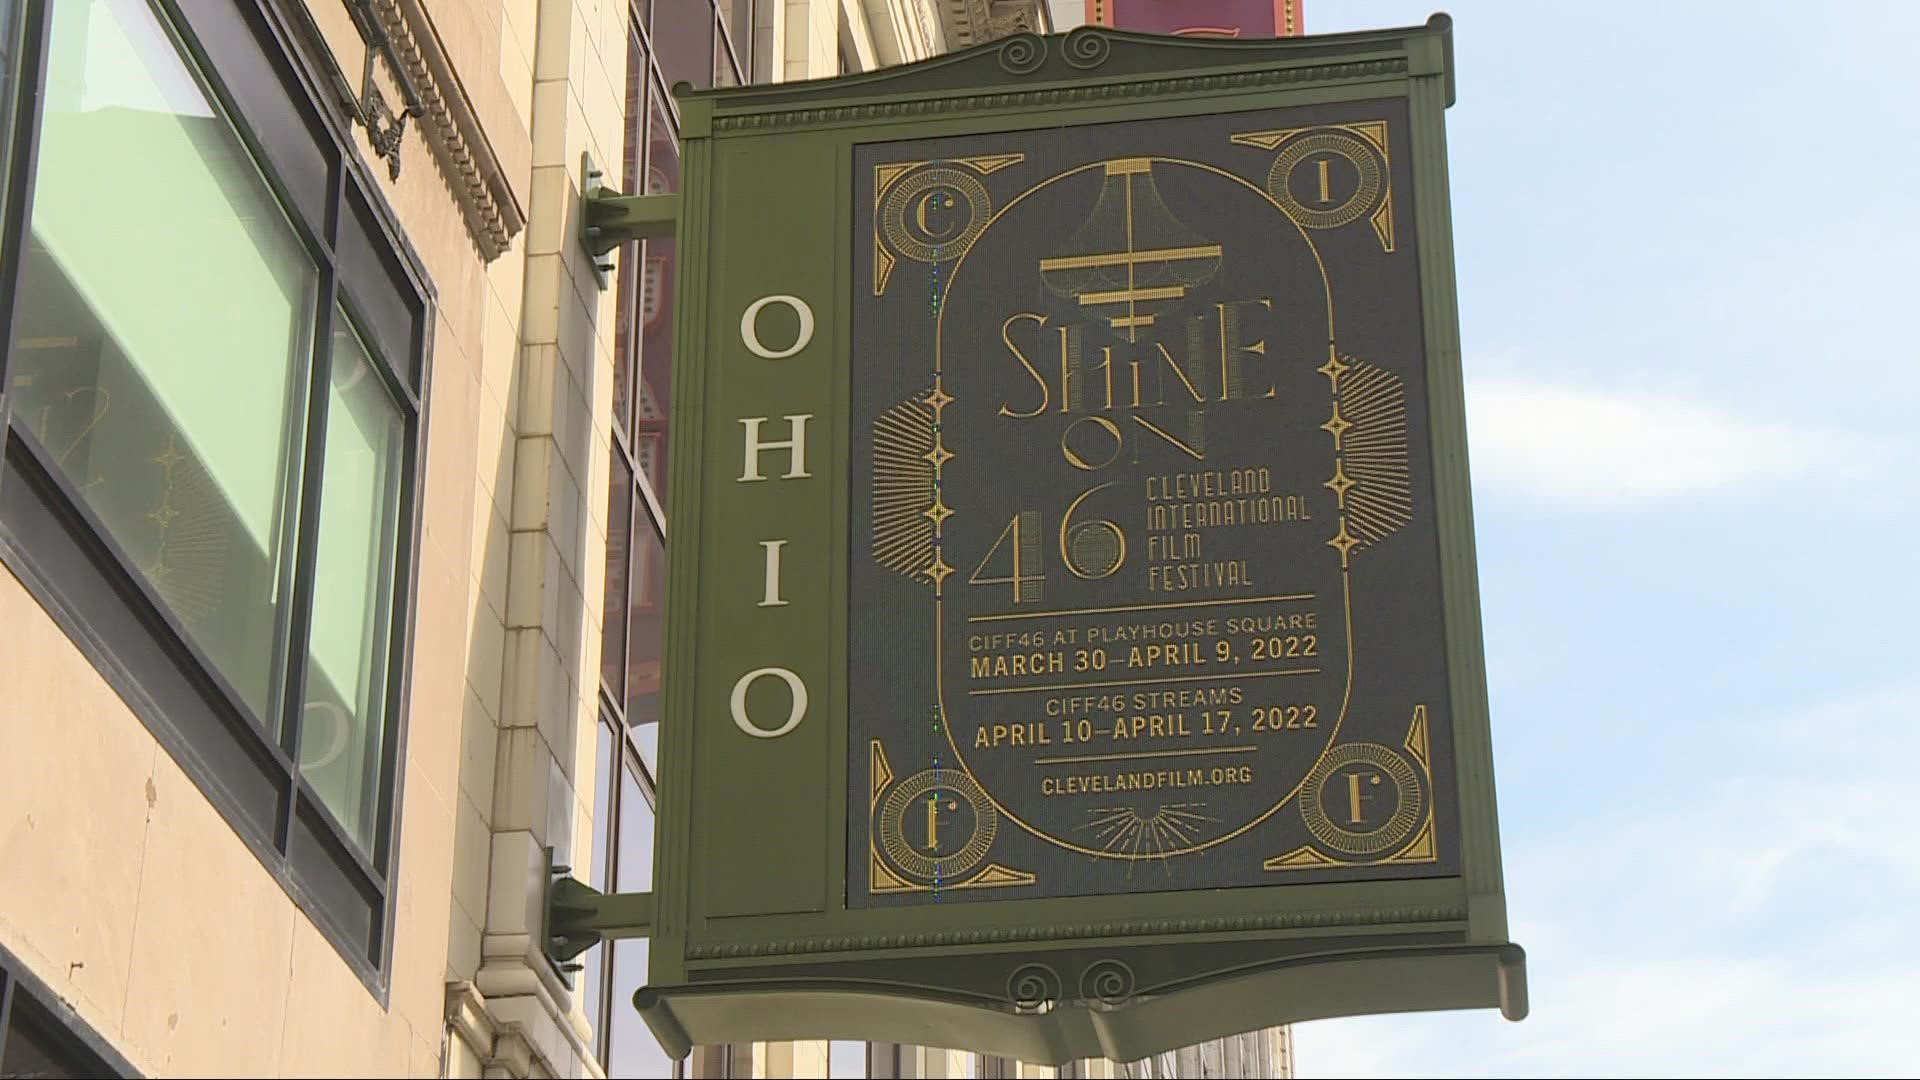 The festival returns Wednesday night in-person and at a new location: Playhouse Square.